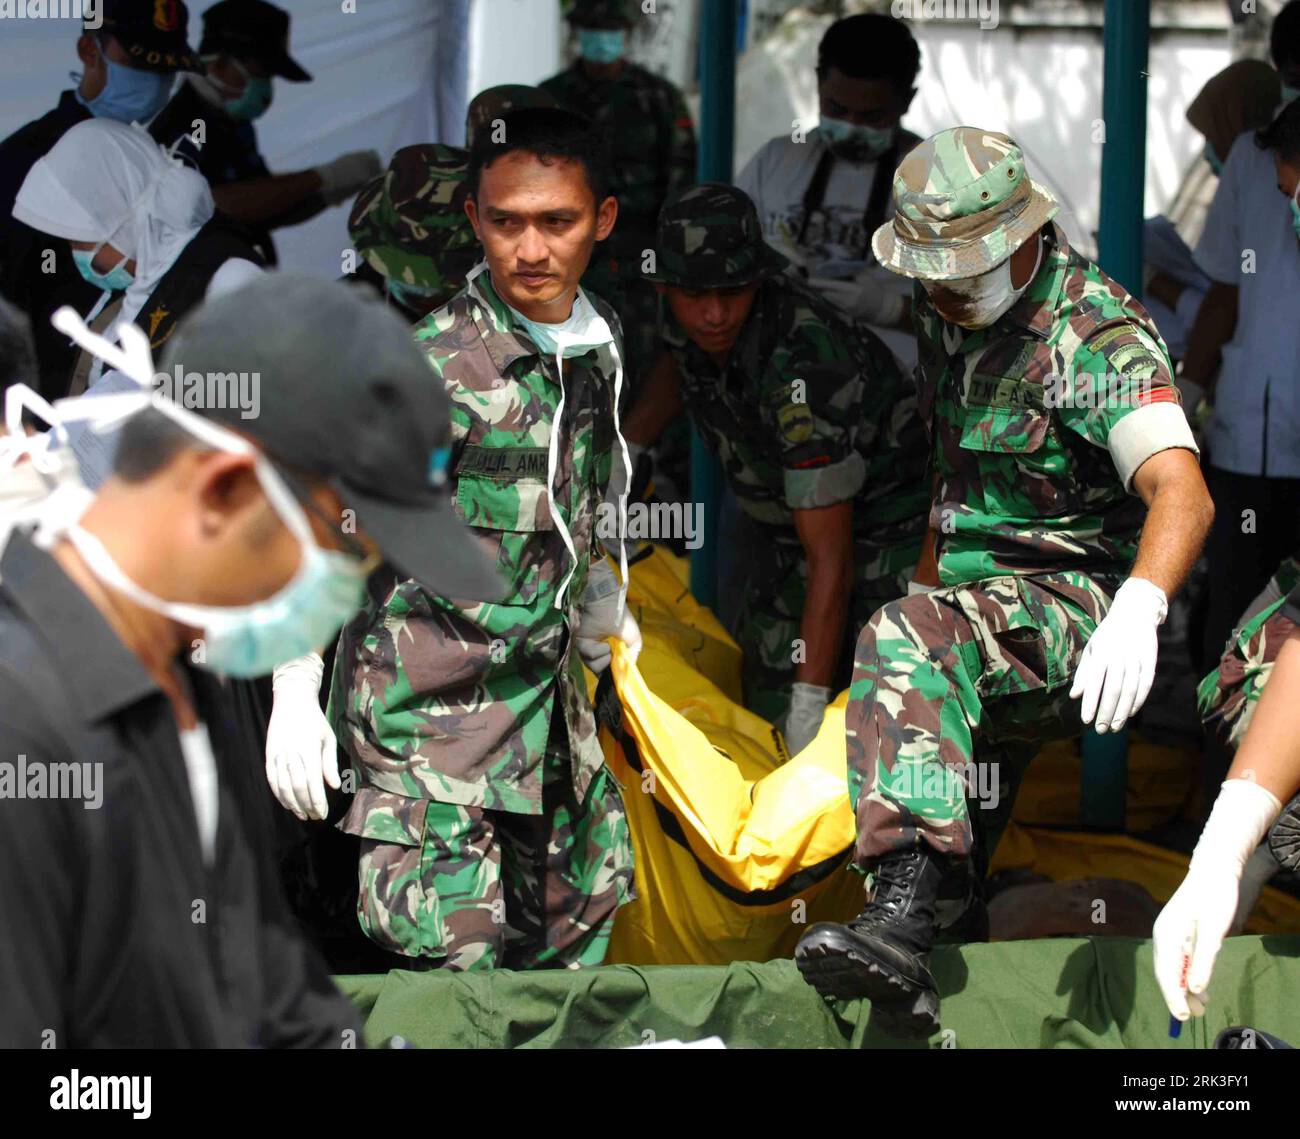 Bildnummer: 53480089  Datum: 02.10.2009  Copyright: imago/Xinhua (091002) -- PADANG, Oct. 2, 2009 (Xinhua) -- Rescuers carry a victim s body in the Sumatran city of Padang, Indonesia, on Oct. 2, 2009. 1,100were killed in a powerful earthquake Wednesday evening and the number could rise to thousands as manywere still trapped in the debris. (Xinhua/Yue Yuewei) (nxl) (4)INDONESIA-SUMATRA-QUAKE PUBLICATIONxNOTxINxCHN Erdbeben kbdig xsk 2009 quadrat o0 Schäden Zerstörung Soldat Militär Opfer    Bildnummer 53480089 Date 02 10 2009 Copyright Imago XINHUA  Padang OCT 2 2009 XINHUA Rescue Carry a Victi Stock Photo